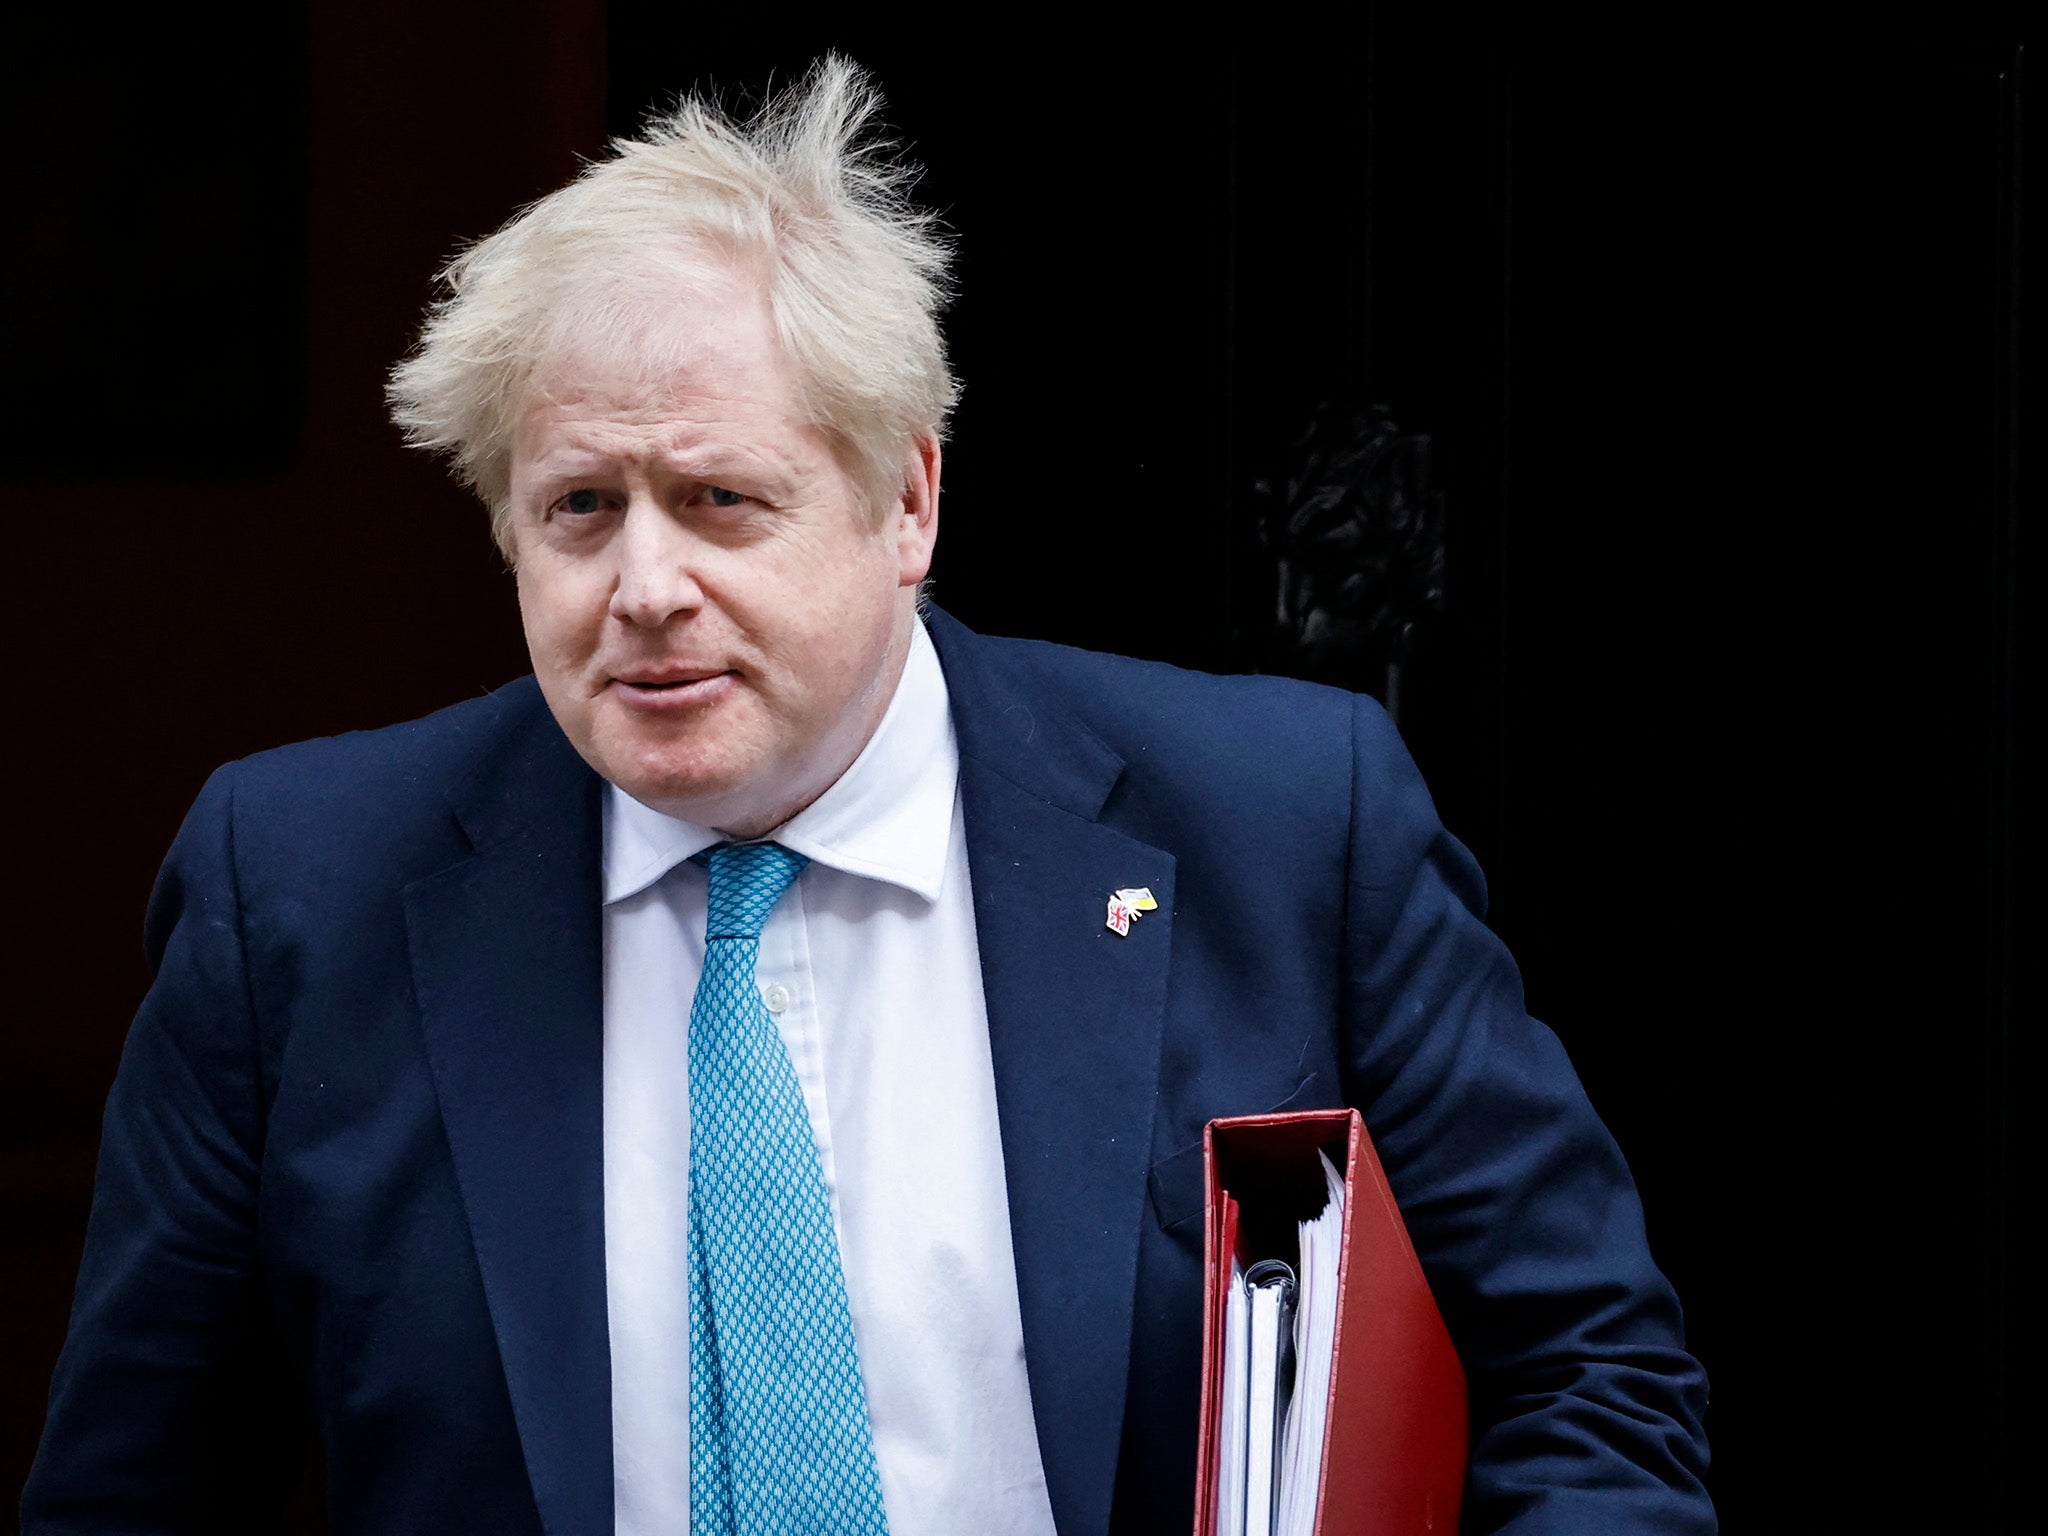 Boris Johnson on his way to Prime Minister’s Questions in the Commons on Wednesday